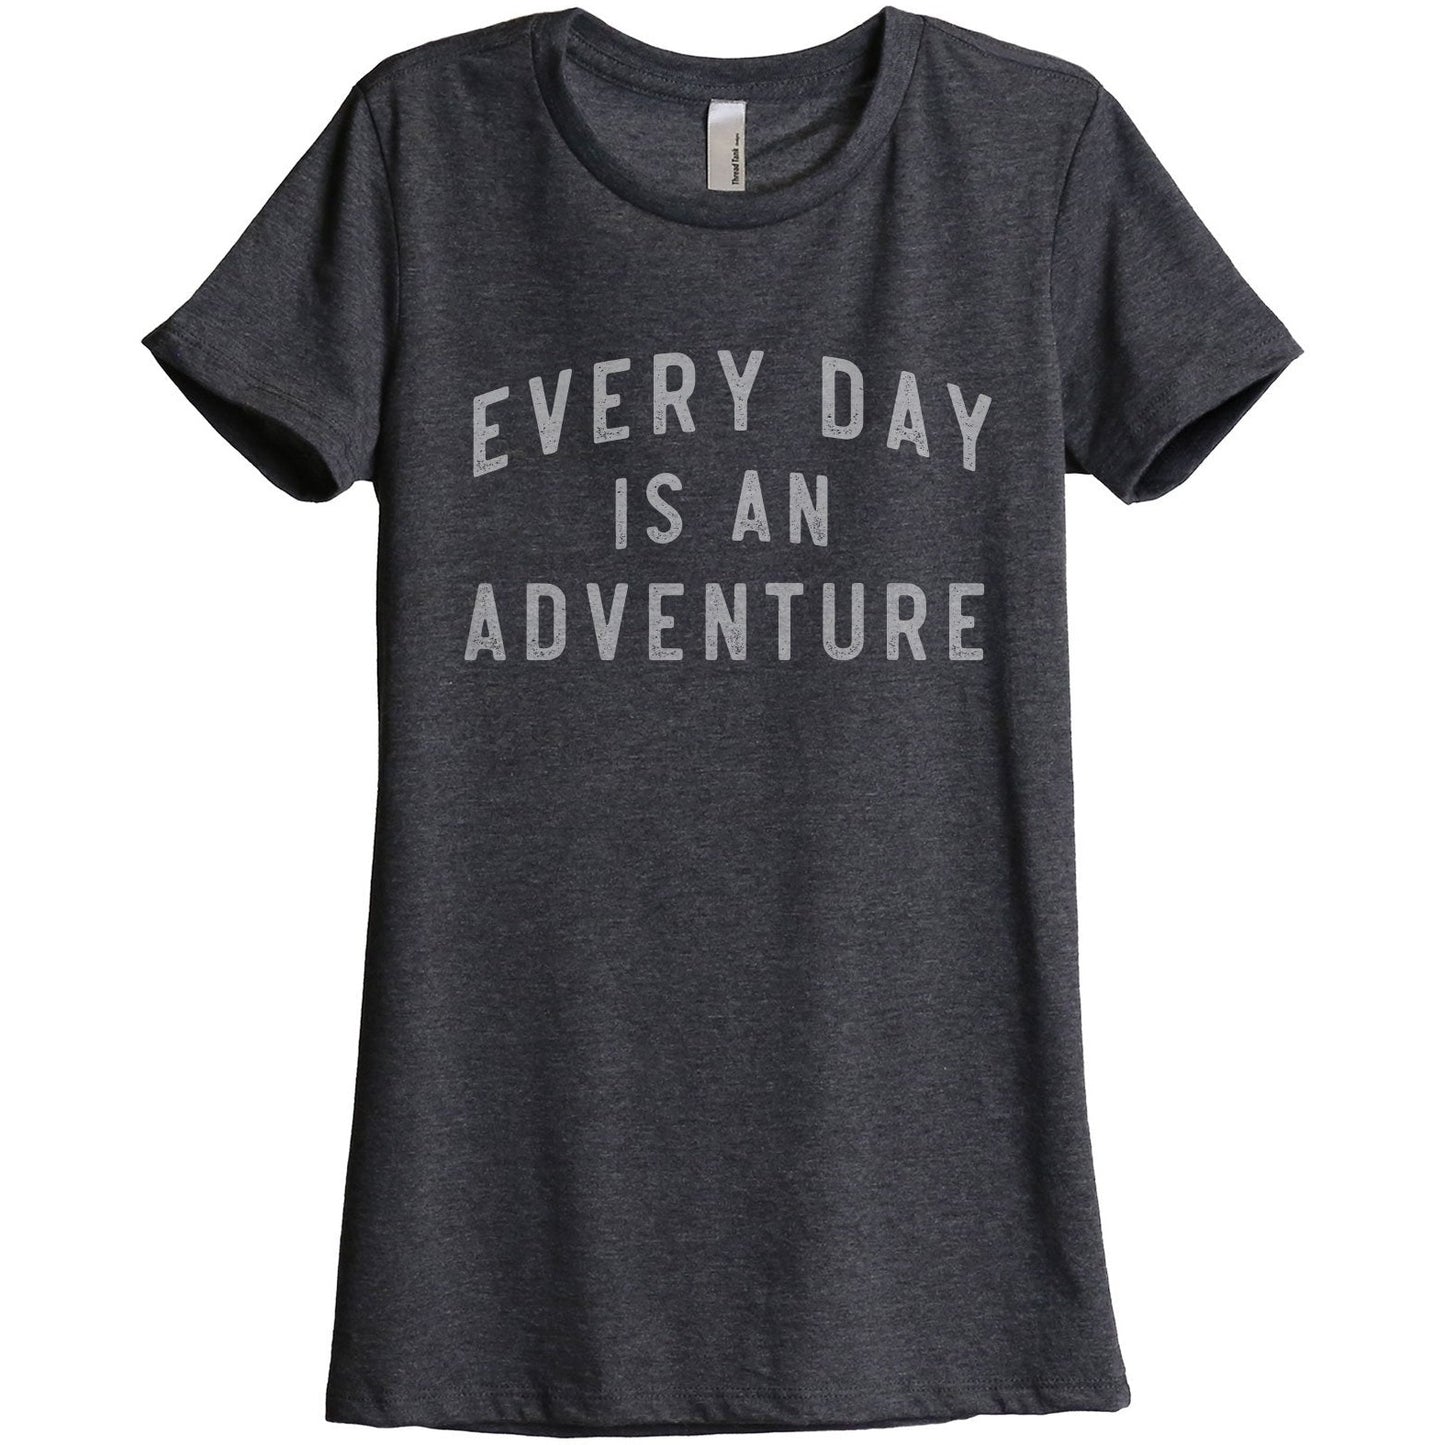 Everyday Is An Adventure Women's Relaxed Crewneck T-Shirt Top Tee Charcoal Grey
